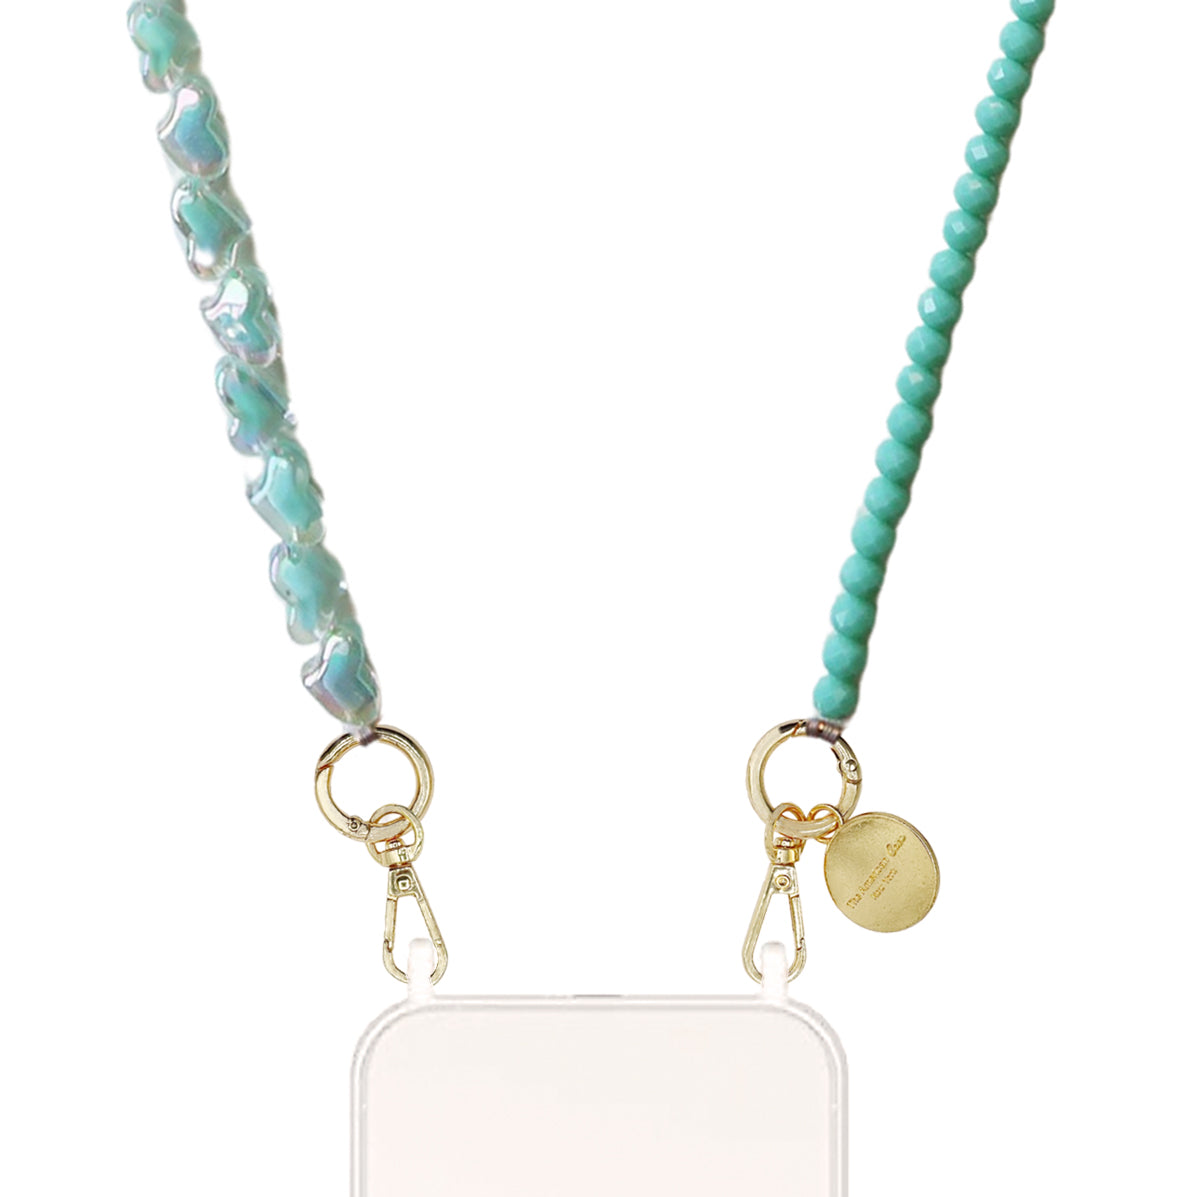 Lila - Vibrant Glitter Heart and Round Bead Crossbody Chain with Golden Carabiners